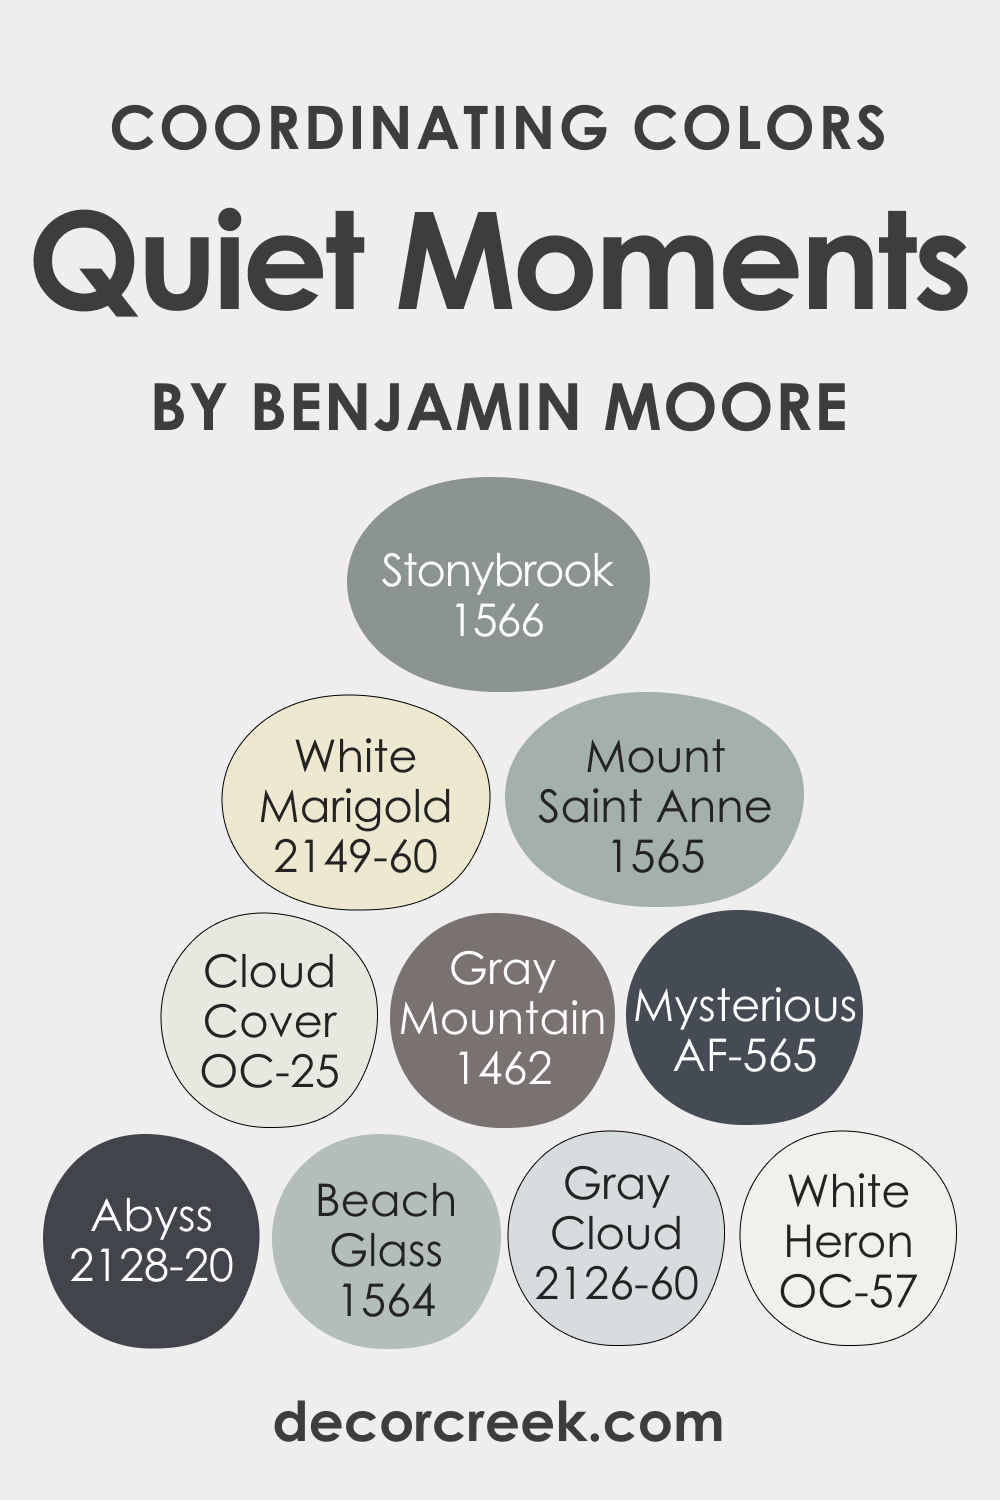 What Coordinating Colors to Use With BM 1563 Quiet Moments